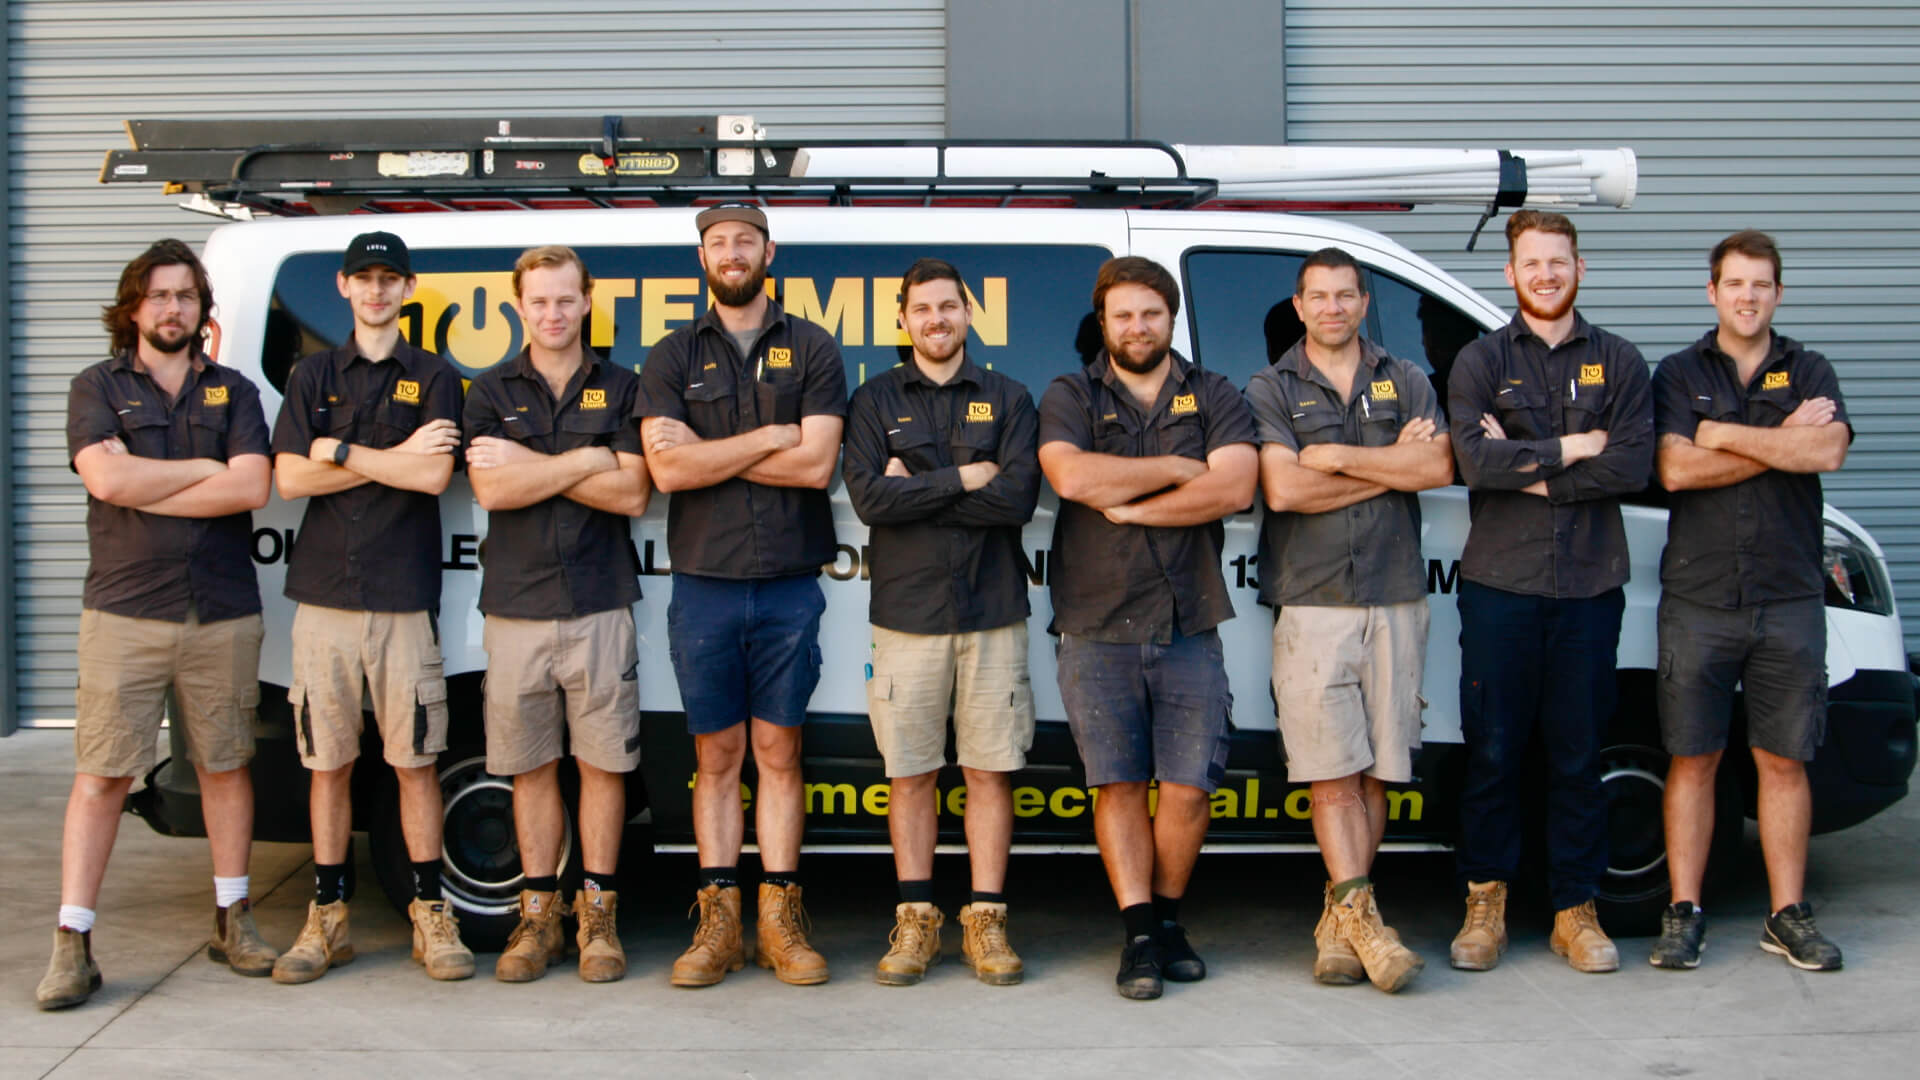 The team of Caloundra electricians standing in front of the working van.